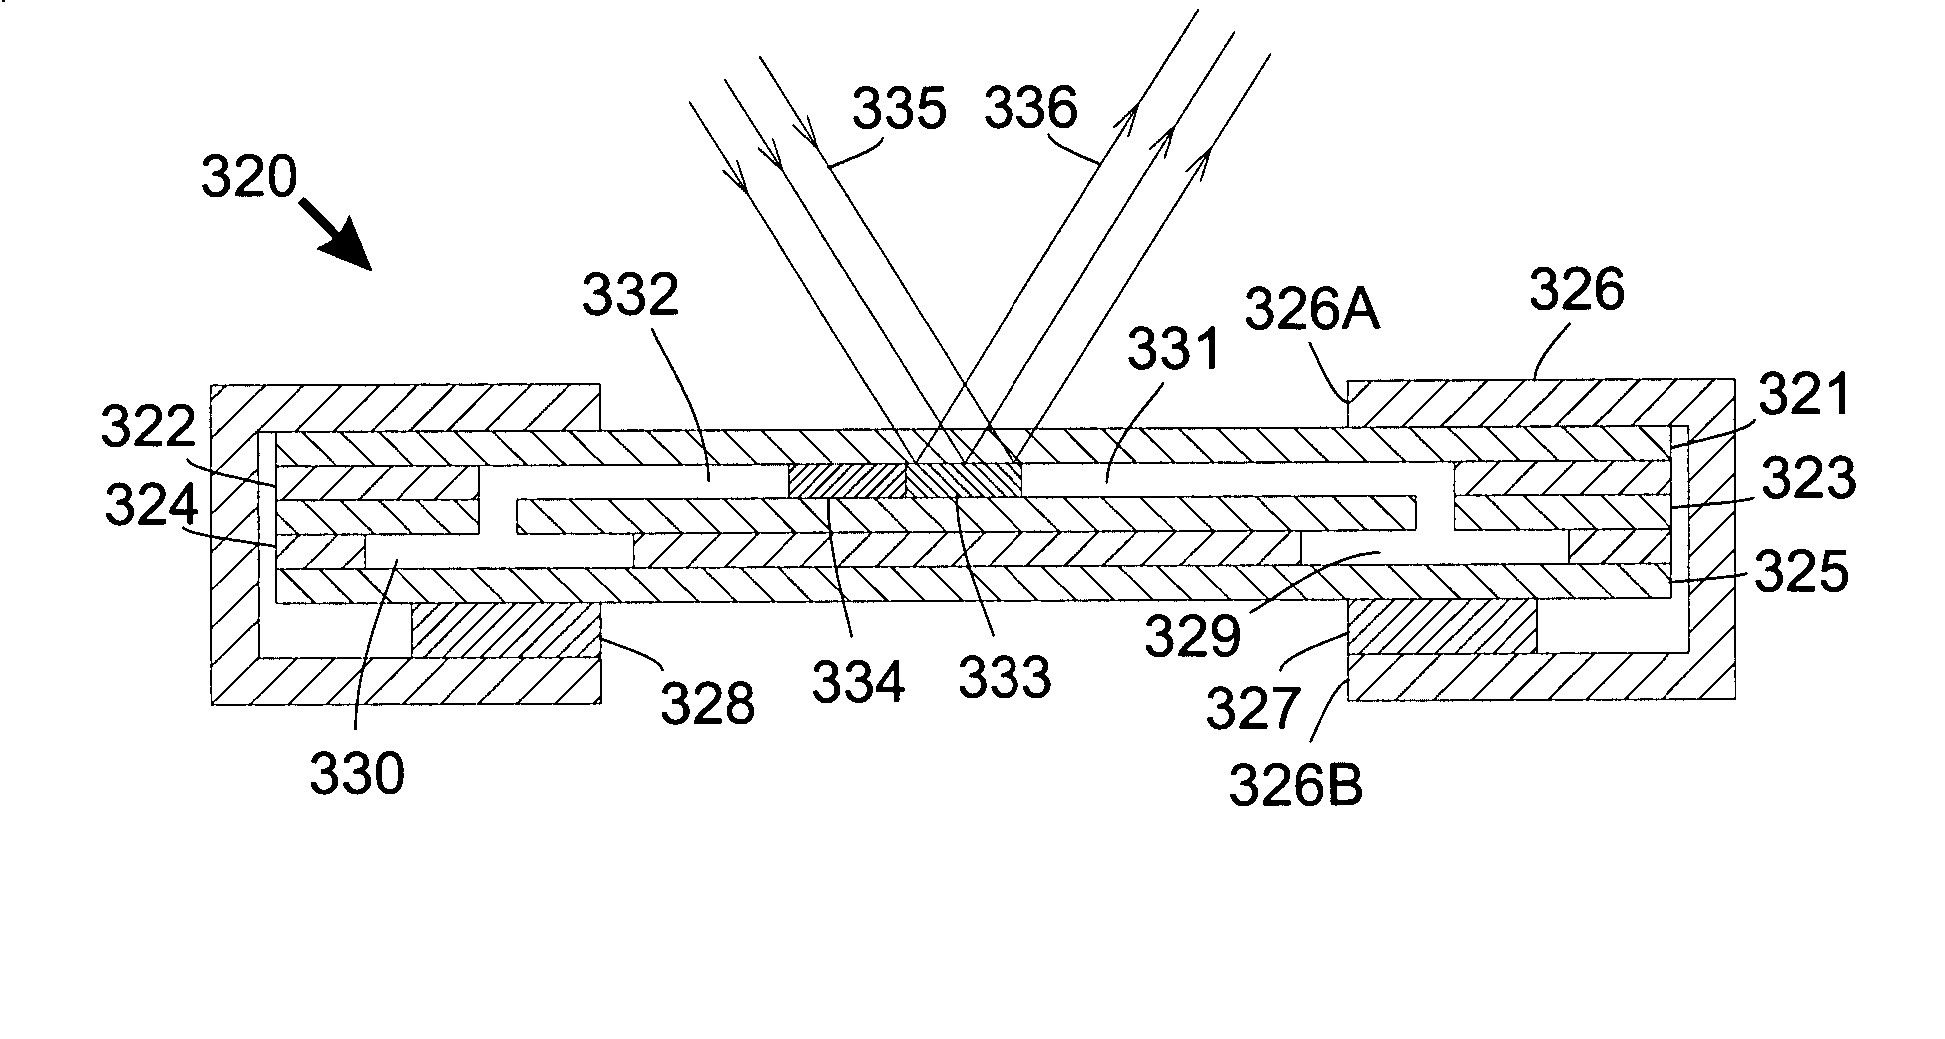 Optical devices with fluidic systems